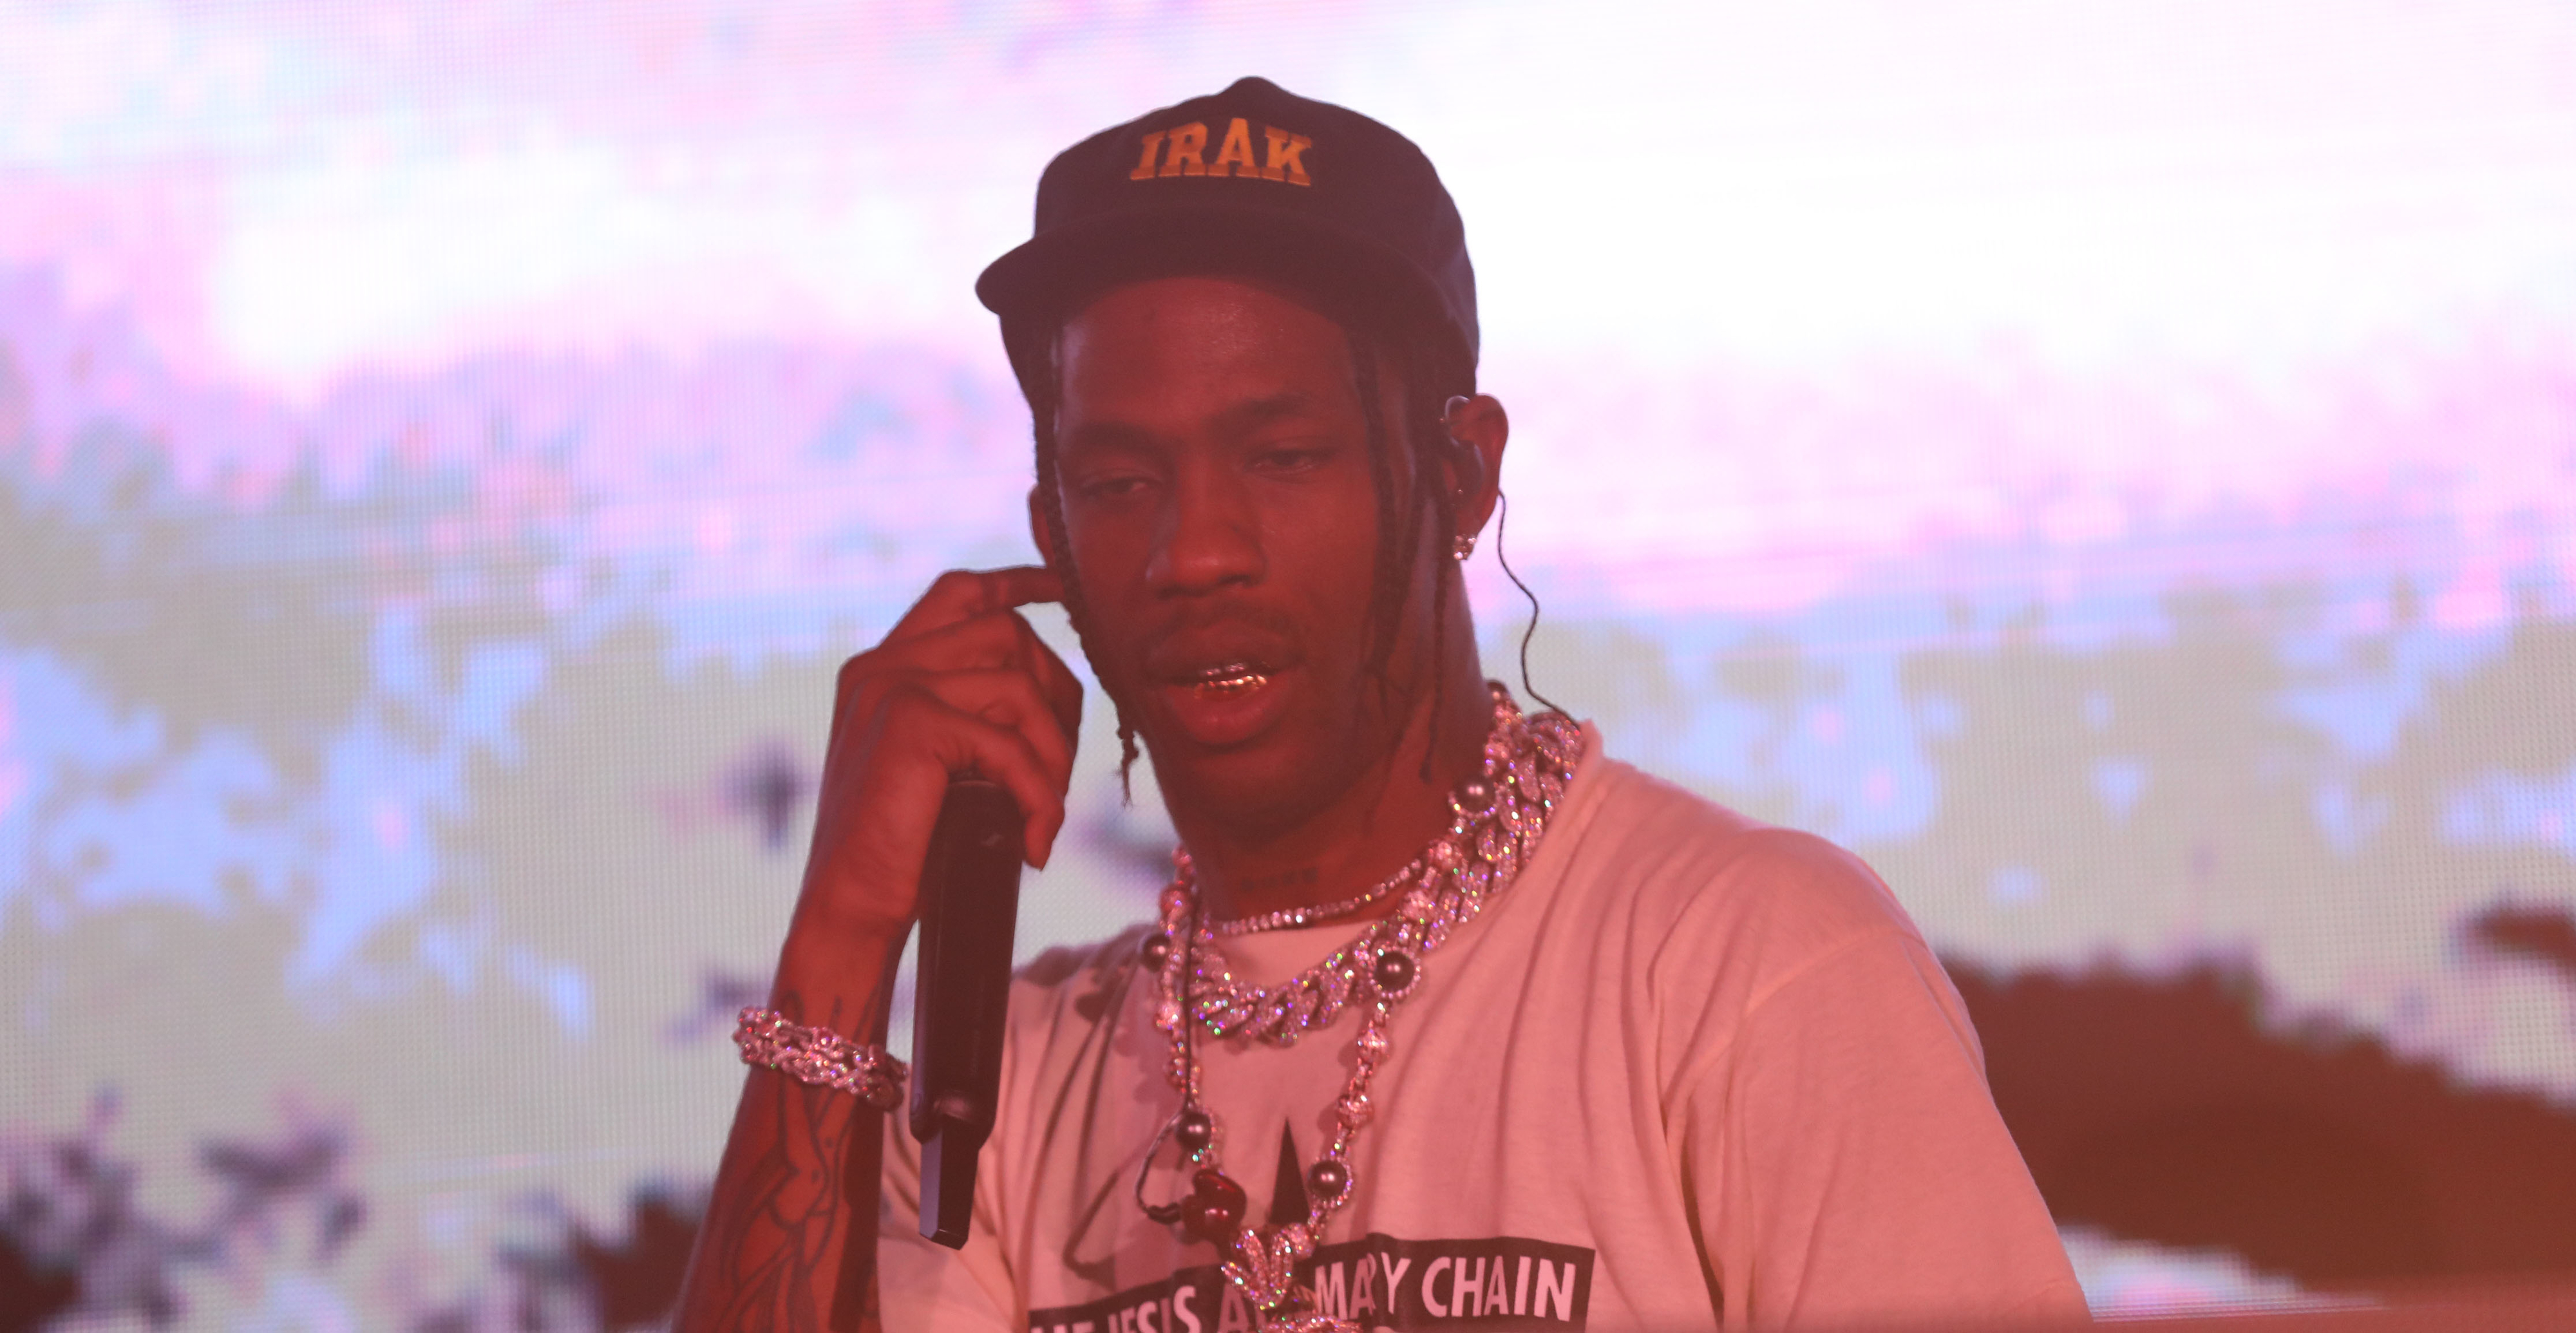 Travis Scott performing on stage, wearing a black cap, white T-shirt, and several silver chains around his neck. He is holding a microphone close to his mouth